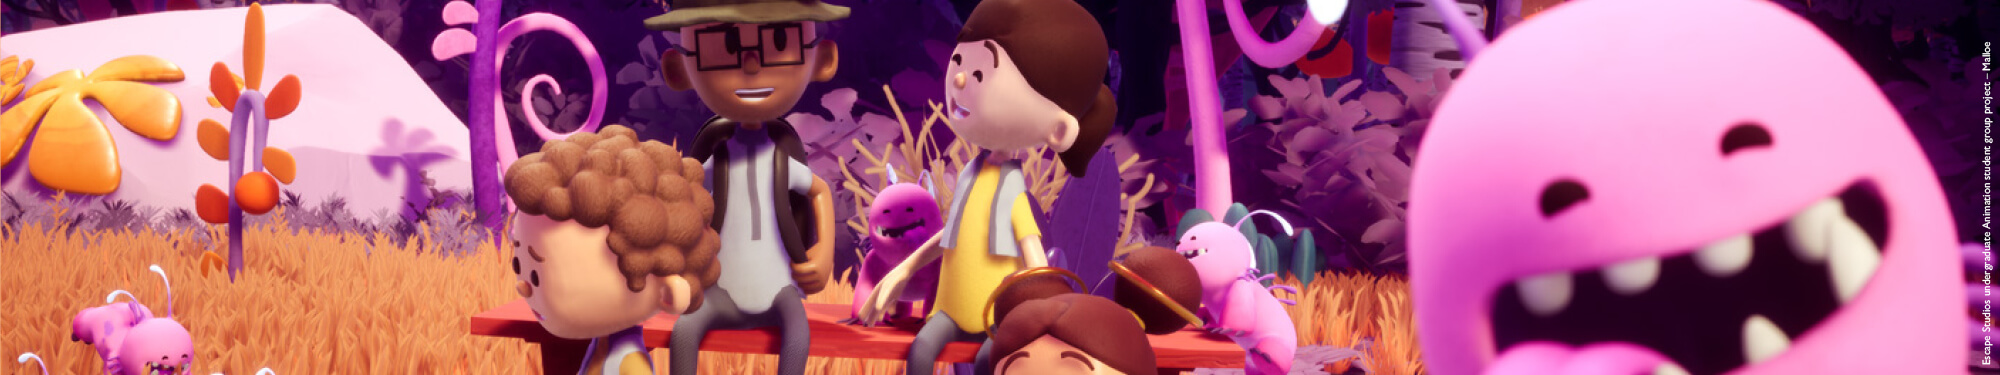 3D animation image from student film showing parents with two kids and pink aliens